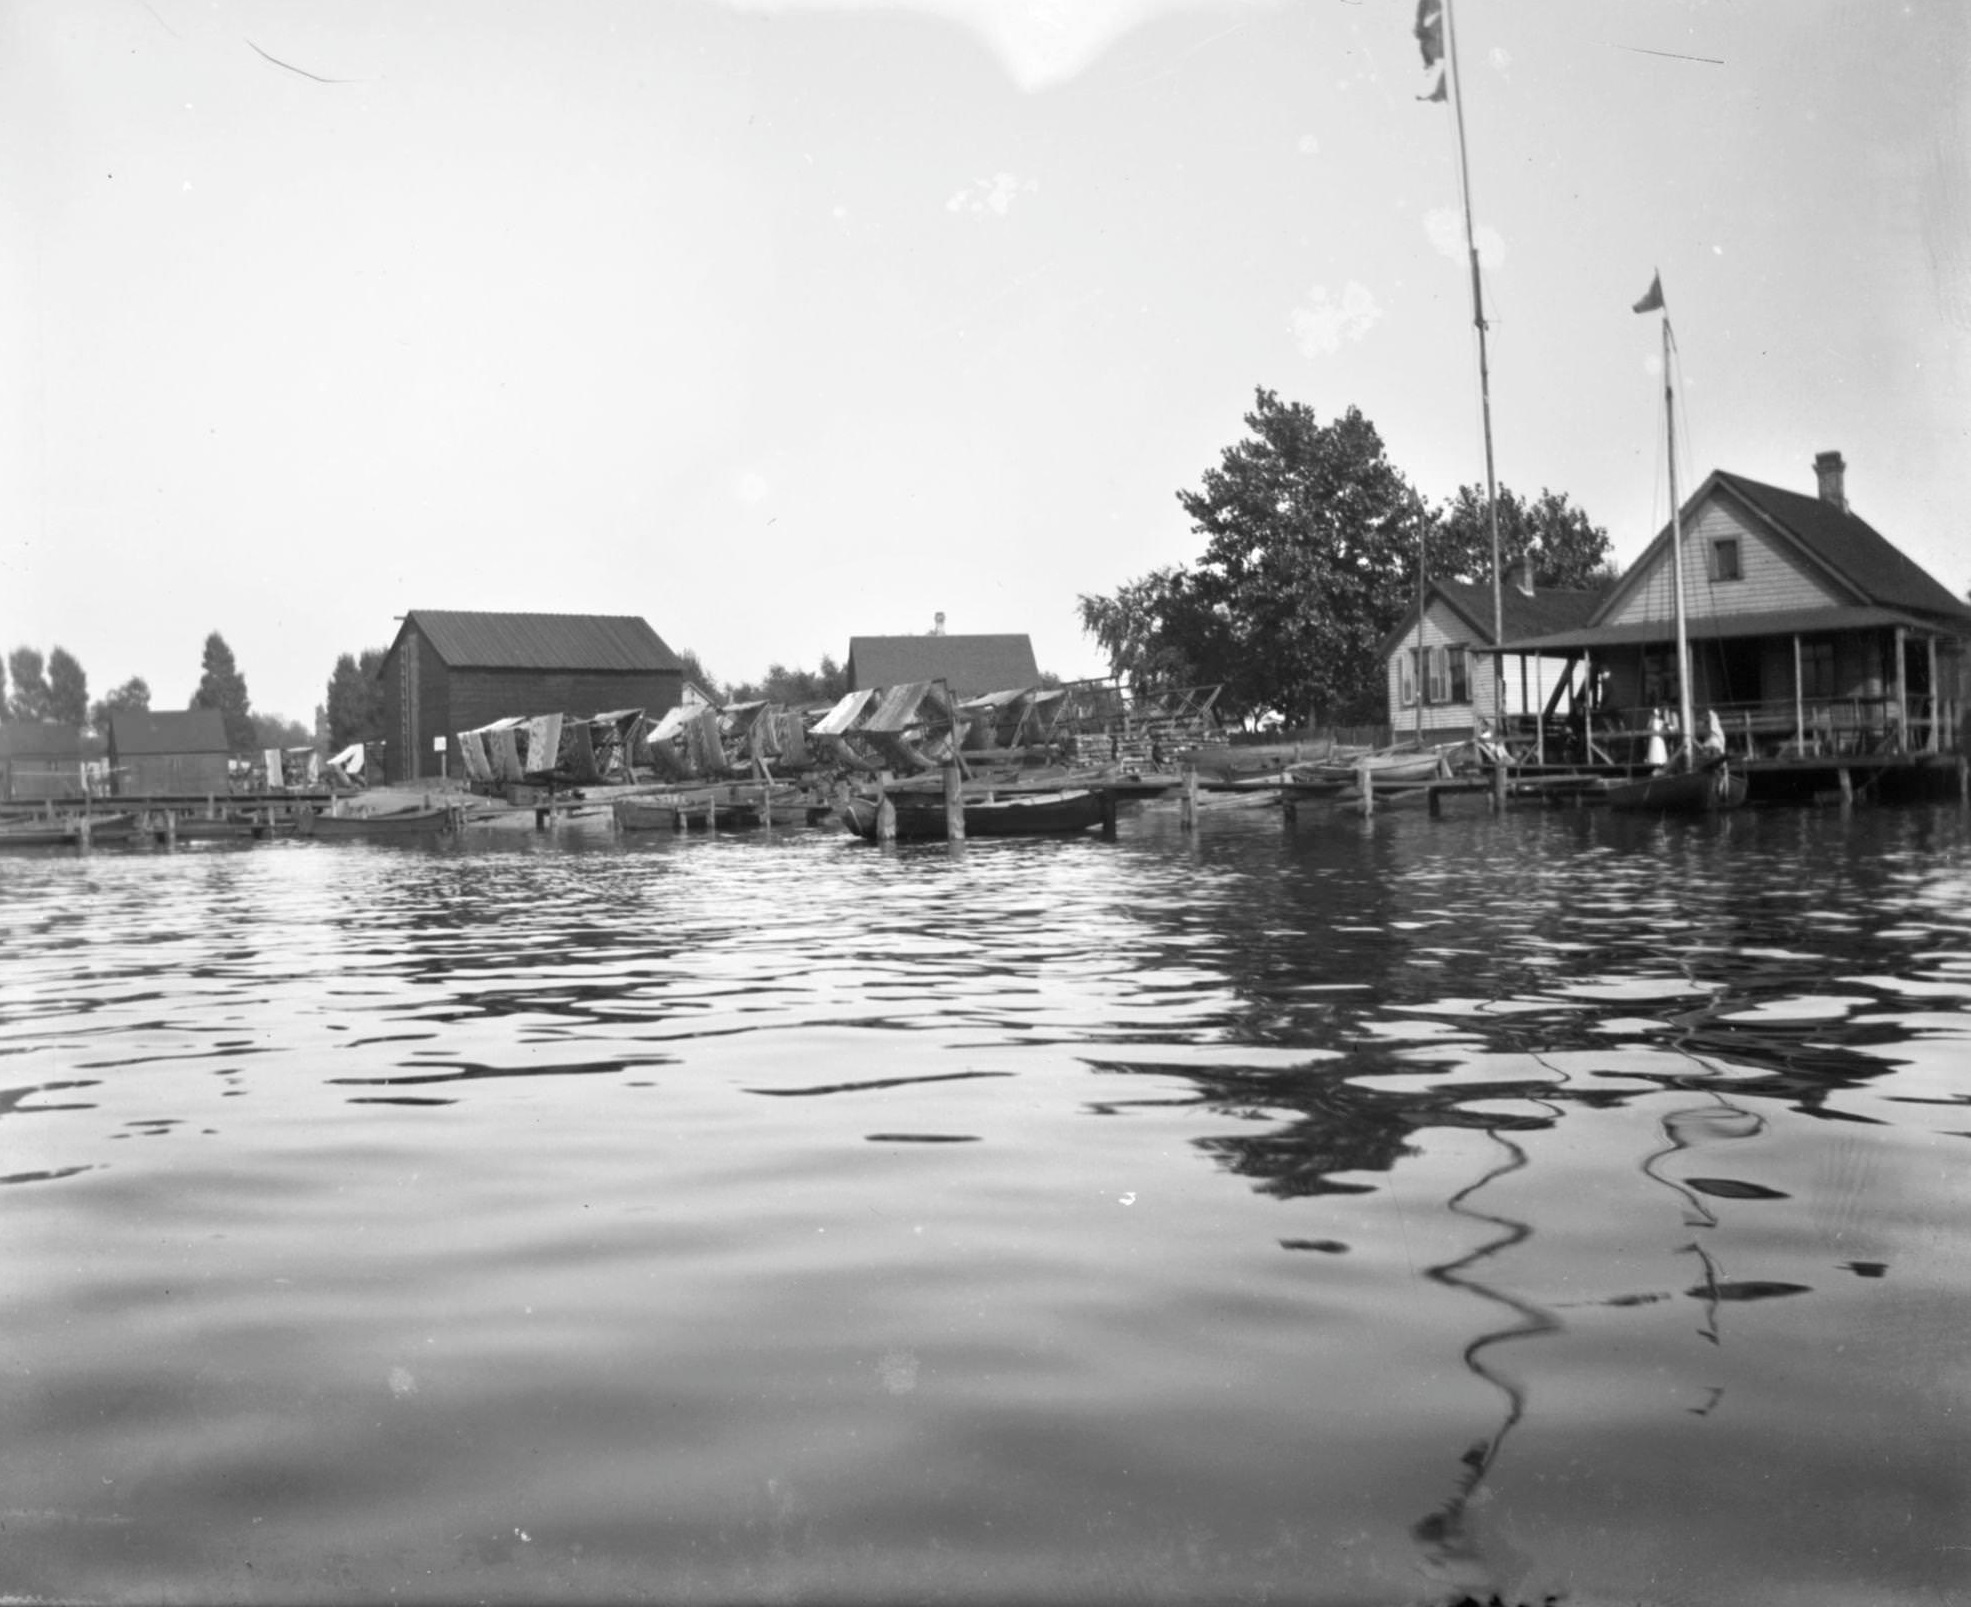 View from water of boats docked near houses on Jones Island, Milwaukee, Wisconsin, 1898.